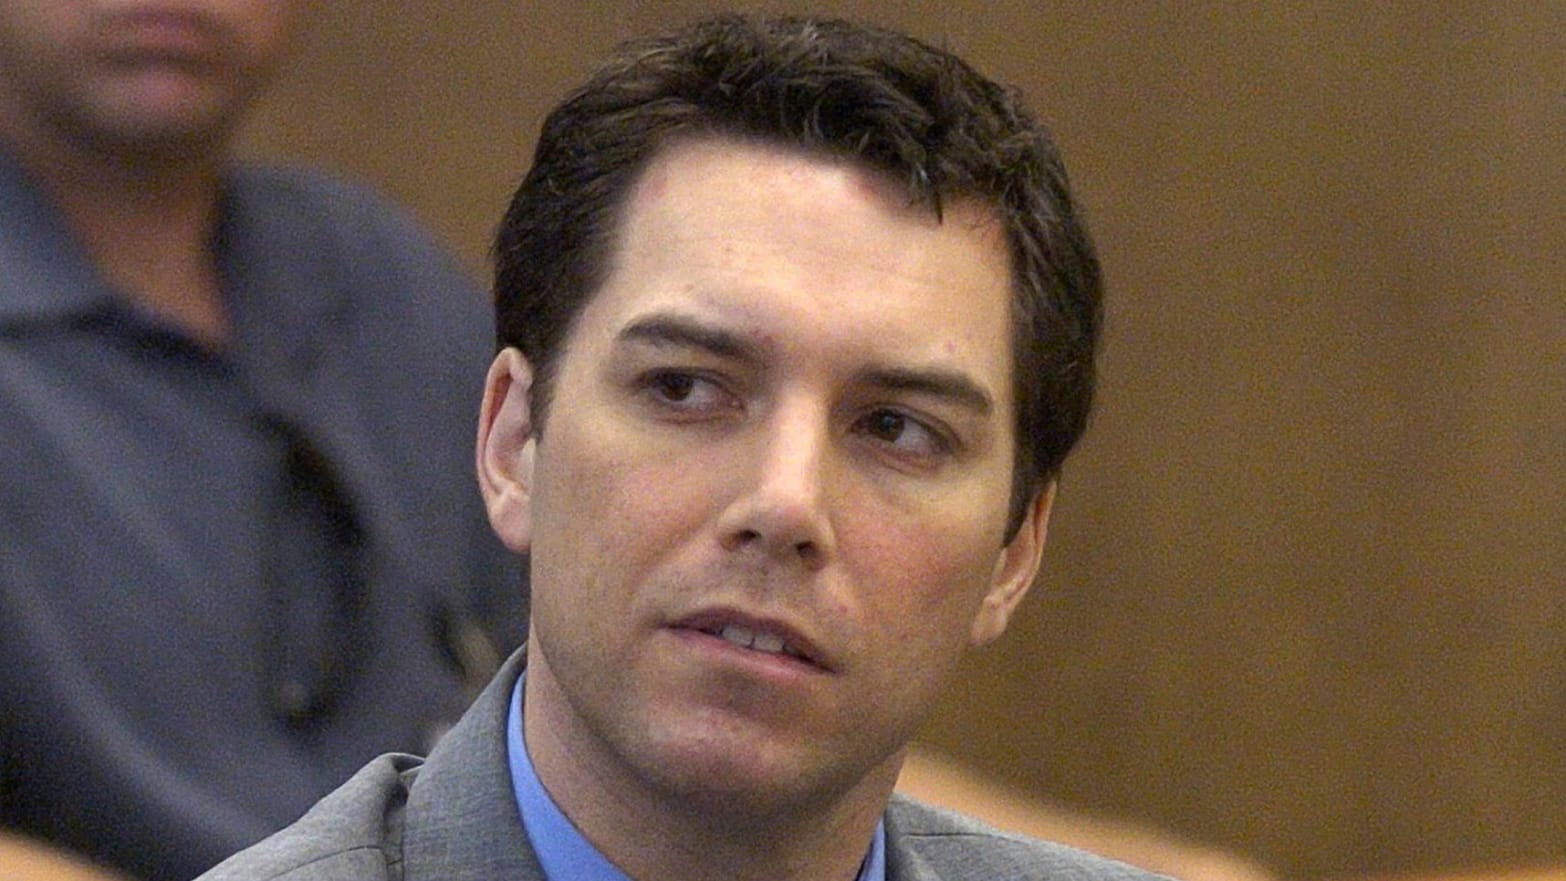 Scott Peterson during his hearing inside the San Mateo County Superior Courthouse in Redwood City, California in 2004